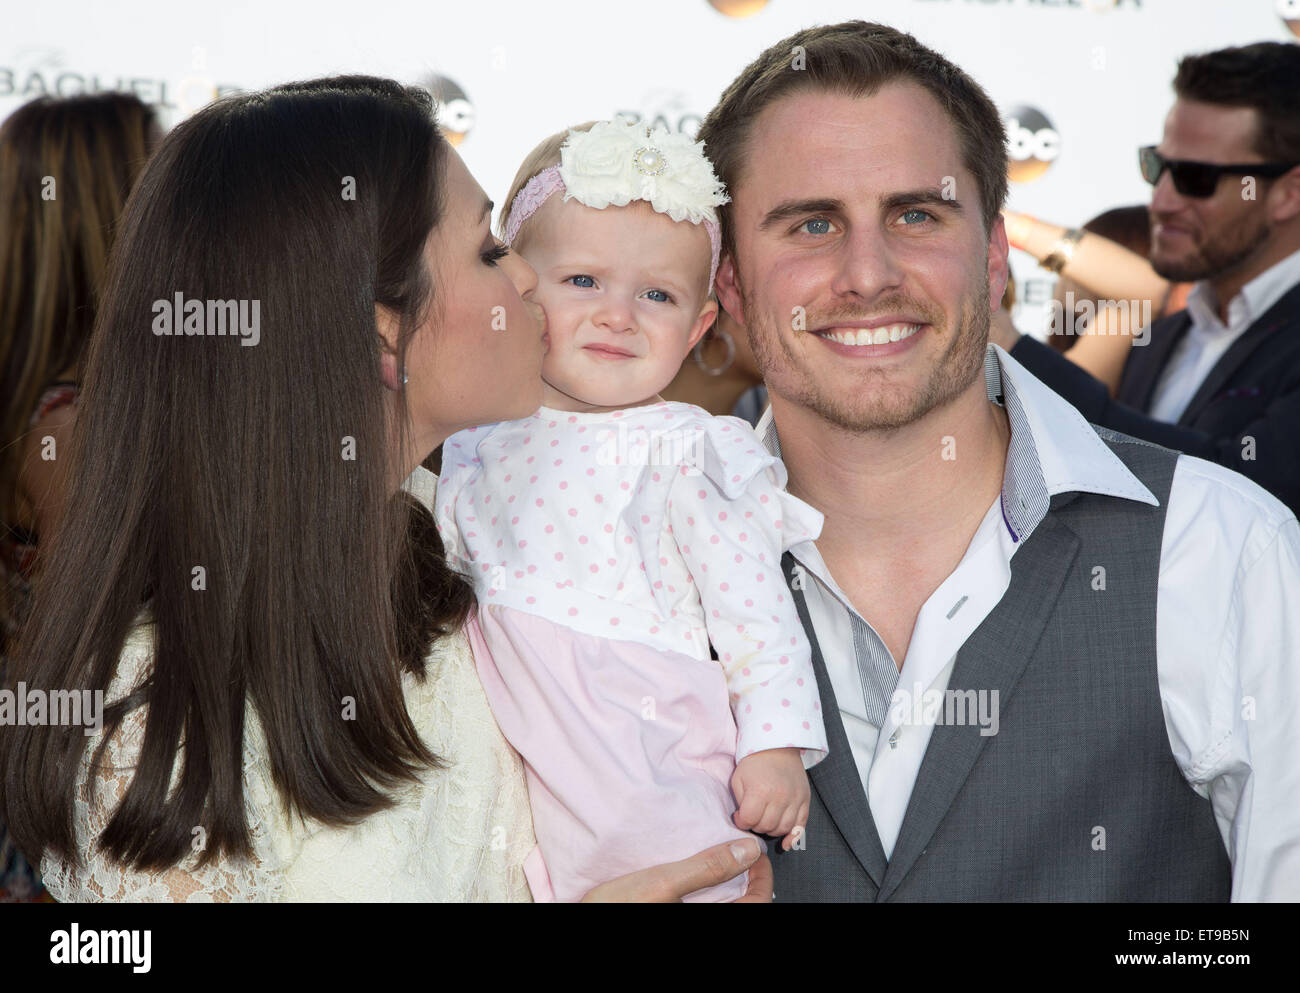 Premiere of ABC's 'The Bachelor' Season 19 at the Line 204 East Stages in Hollywood  Featuring: Deanna Stagliano, Addison Marie Stagliano, Stephen Stagliano Where: Los Angeles, California, United States When: 05 Jan 2015 Credit: Brian To/WENN.com Stock Photo